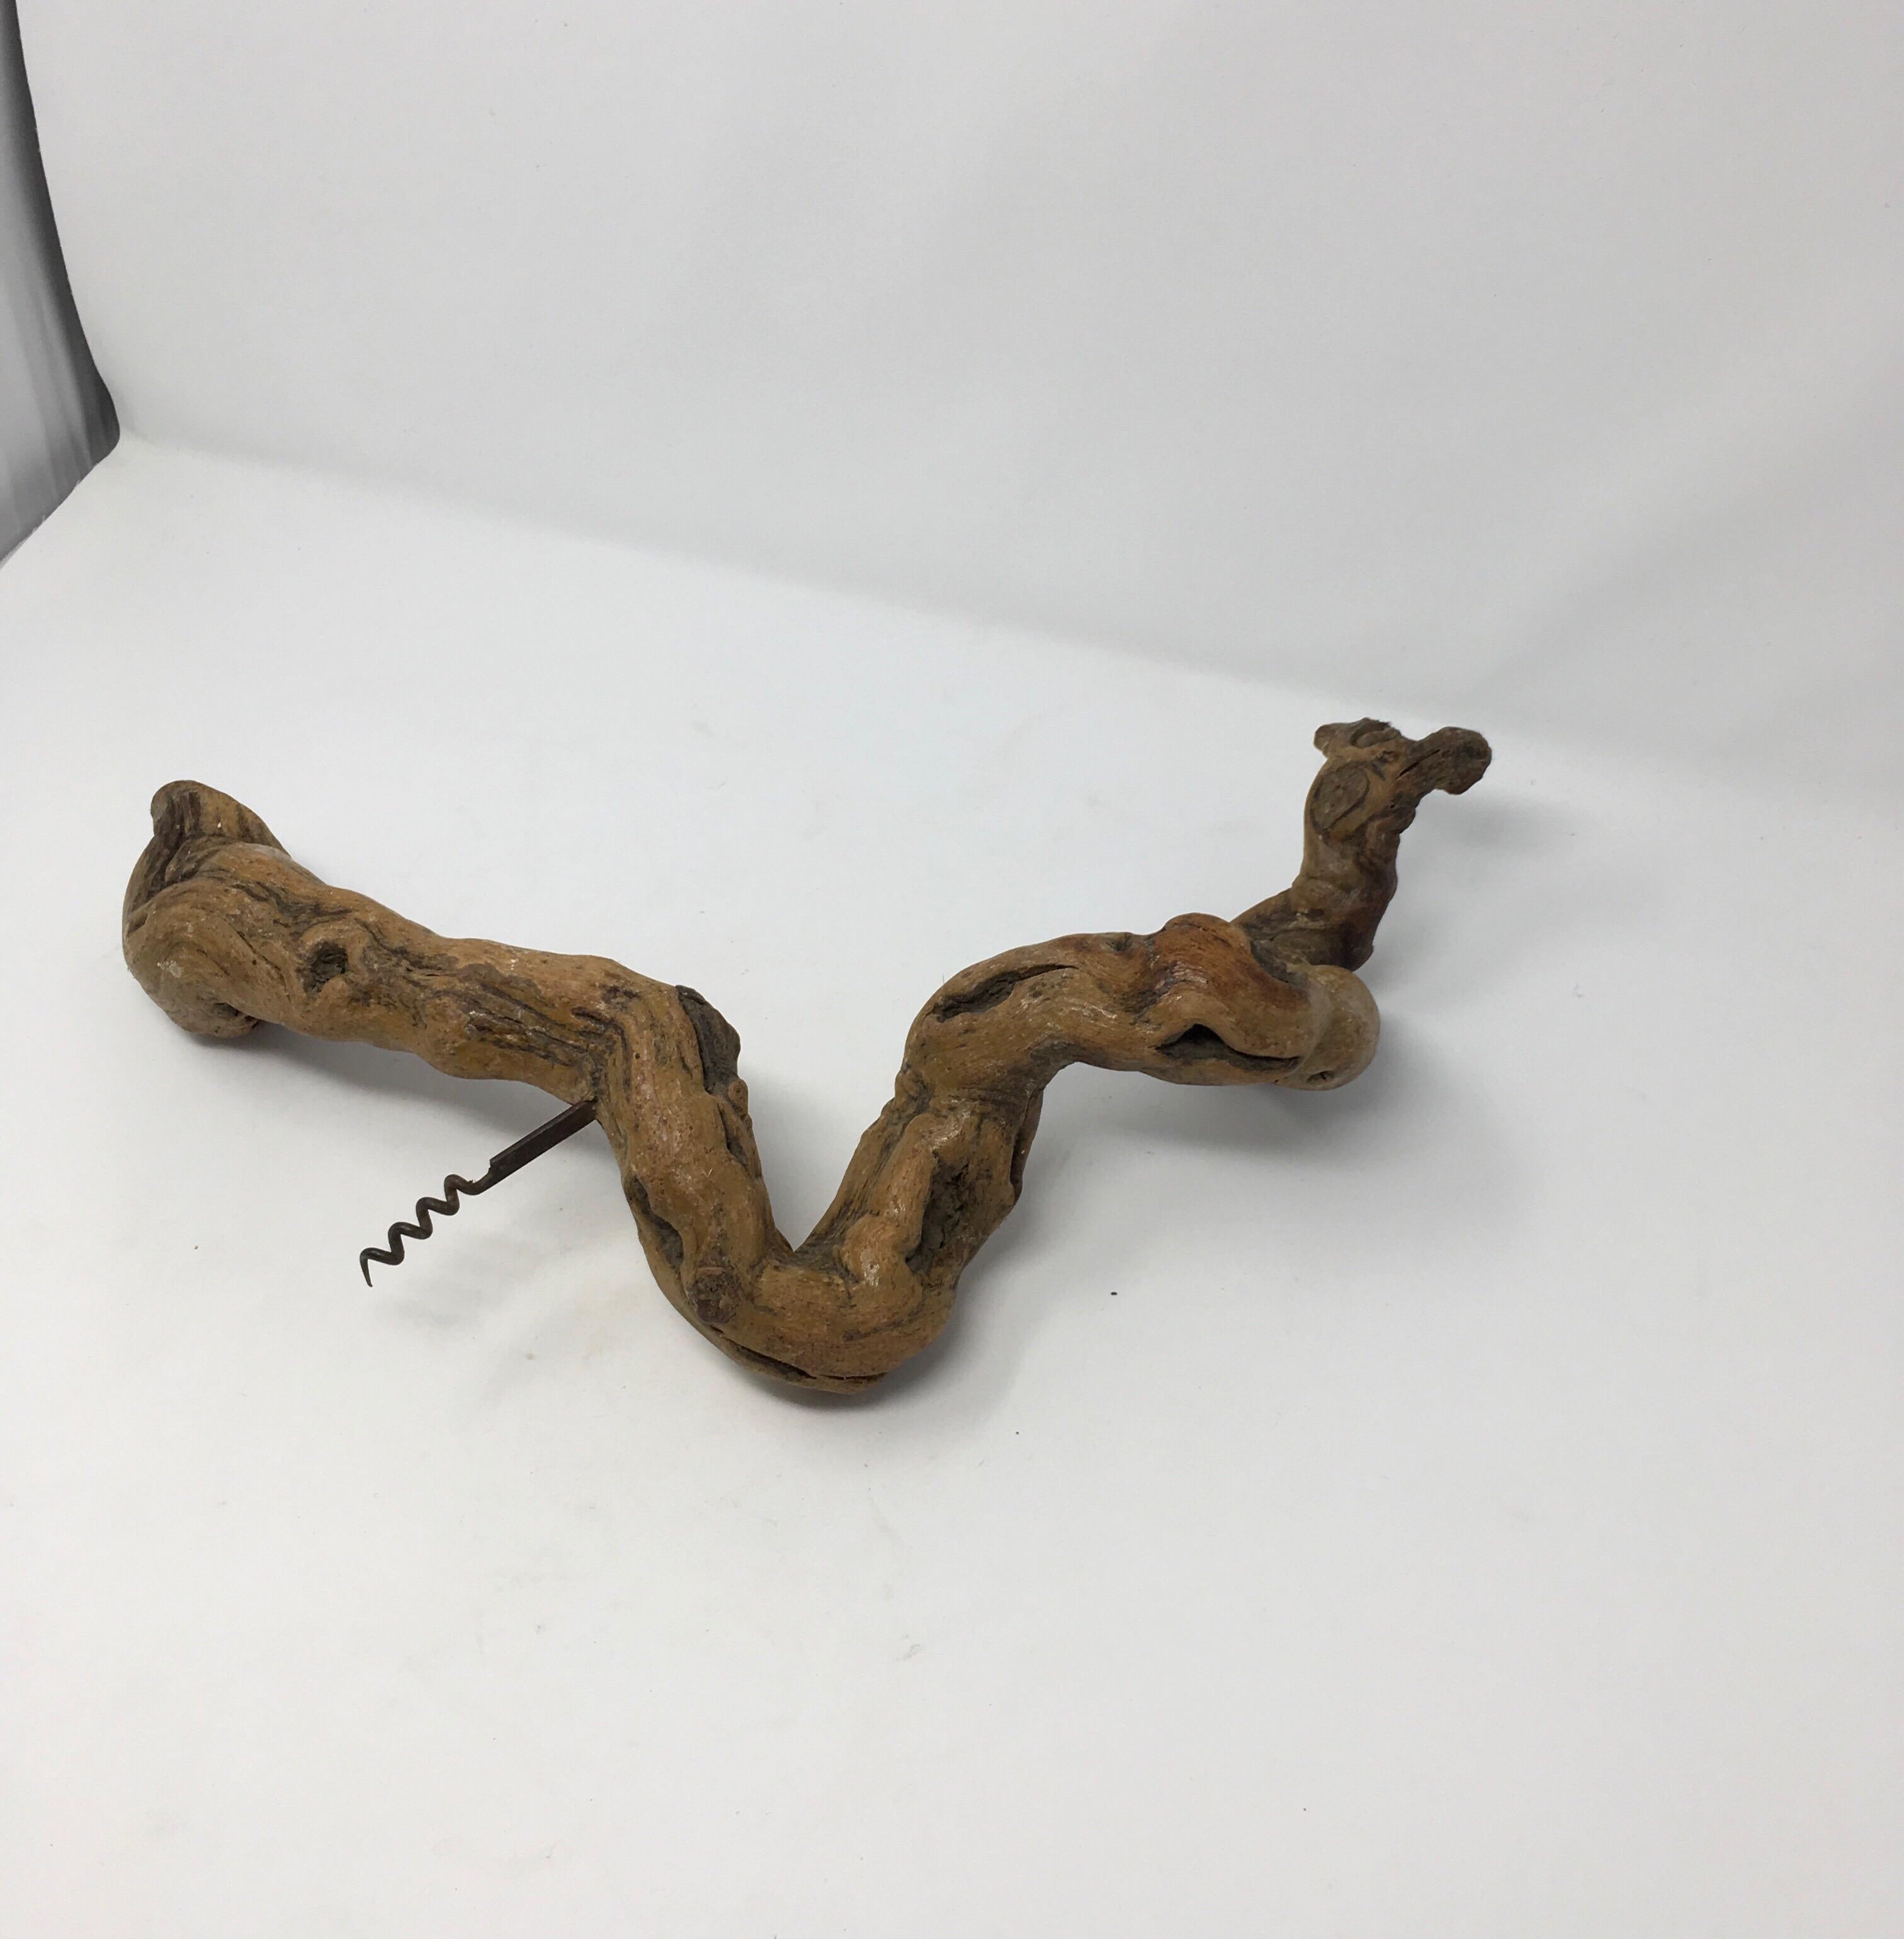 Found in France, this beautiful, large grapevine corkscrew was handmade in the vineyards of Southern France. Perfect to open your wine or hang as a decorative display. A unique piece for the wine lover to add French charm to any wine room, bar or